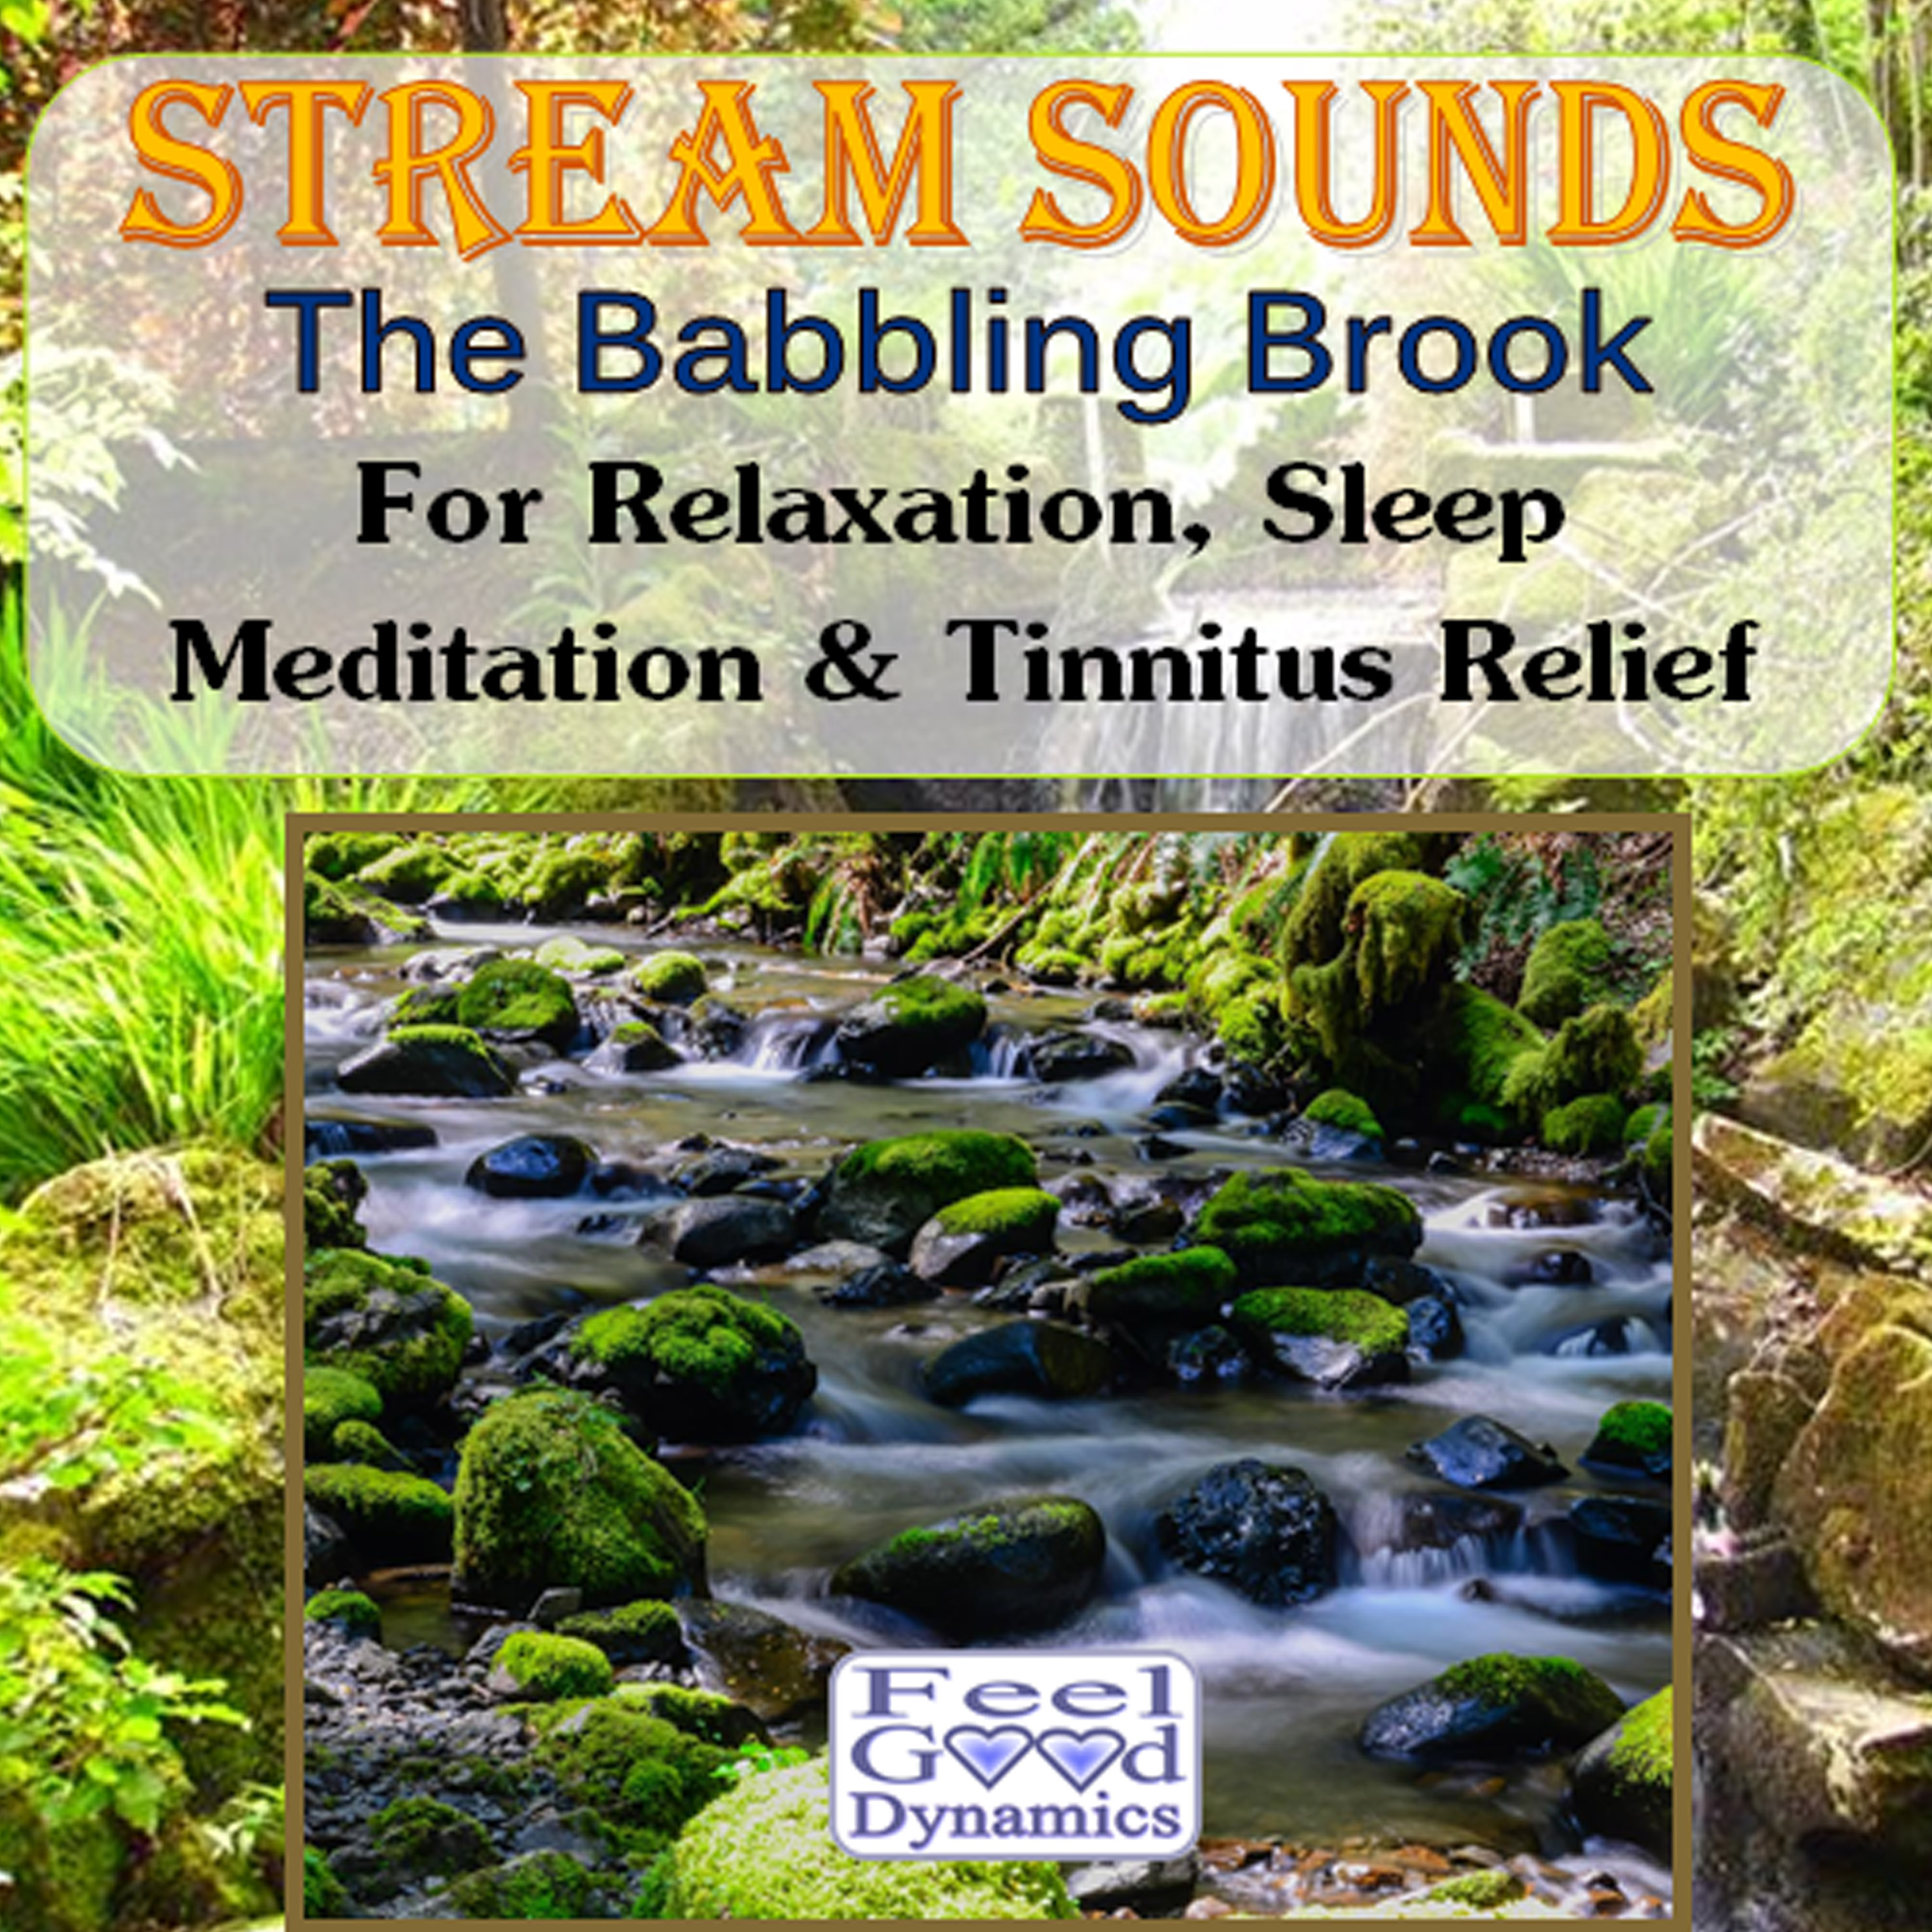 Stream Sounds - The Babbling Relaxing Nature Sounds CD and MP3 Download Feel Good Dynamics